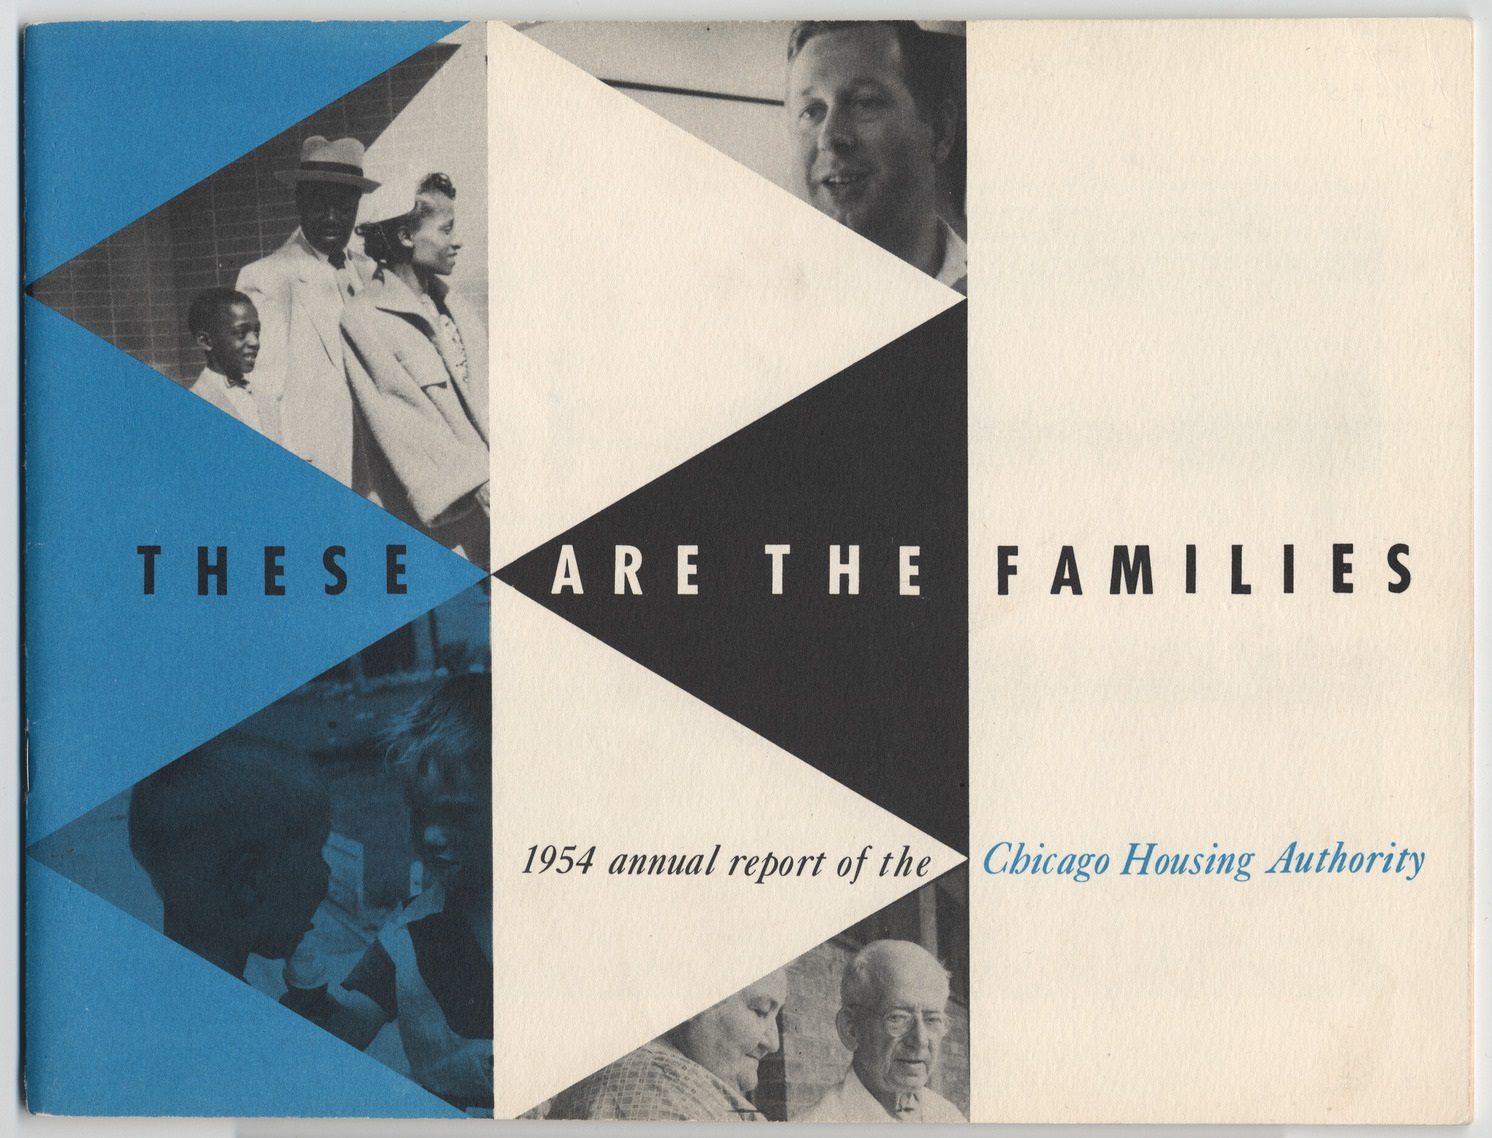 Front cover of the 1954 annual report of the Chicago Housing Authority titled These Are the Families, Chicago, Illinois.